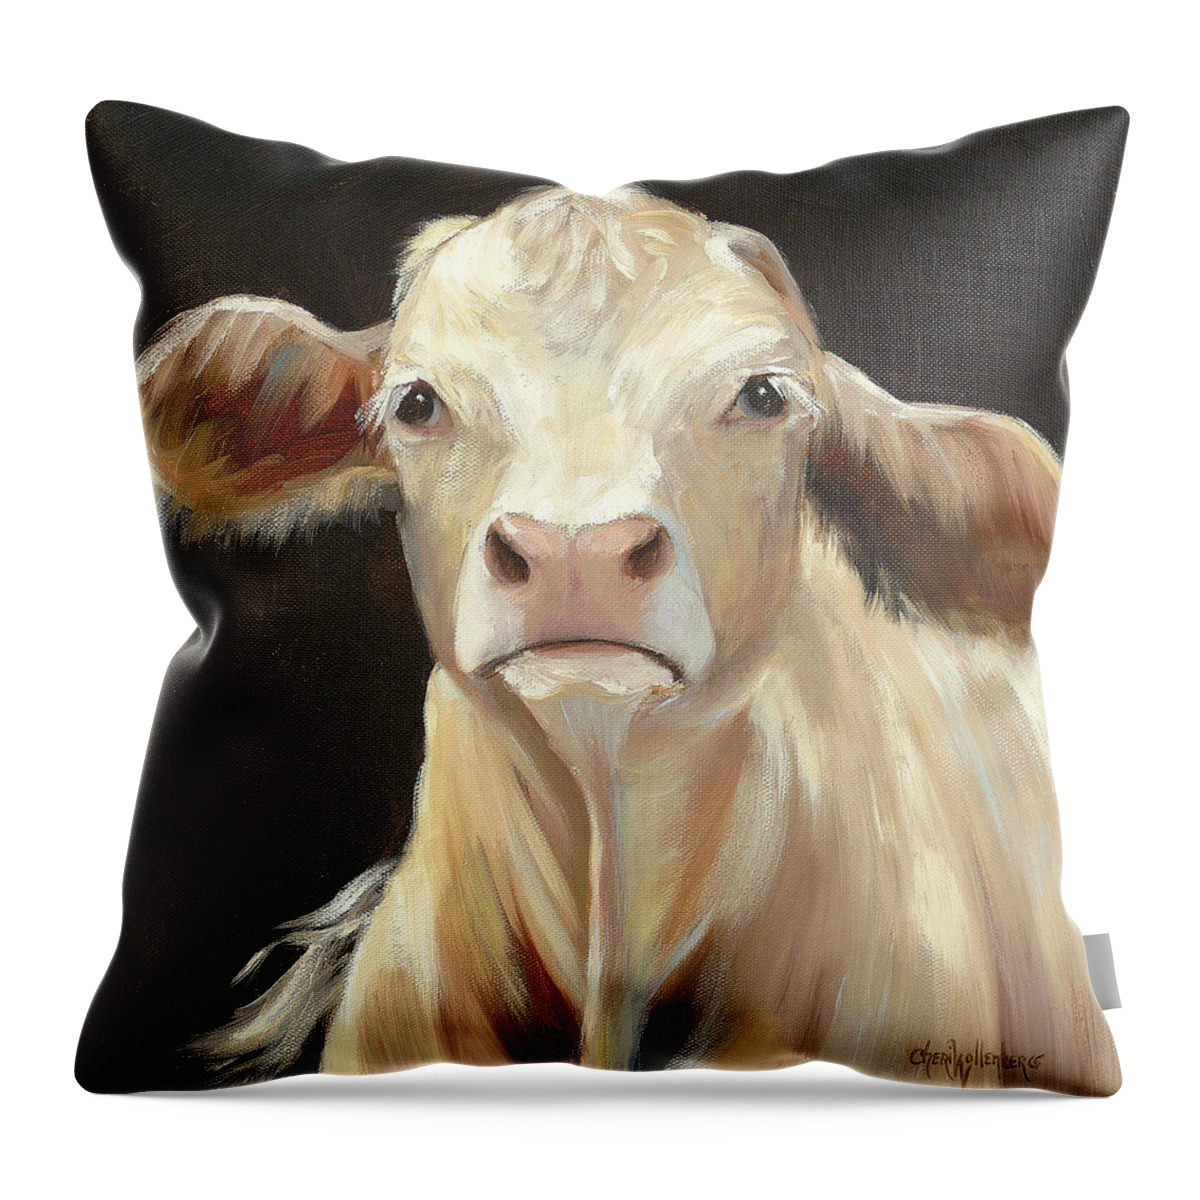 Cow Throw Pillow featuring the painting Beethoven by Cheri Wollenberg